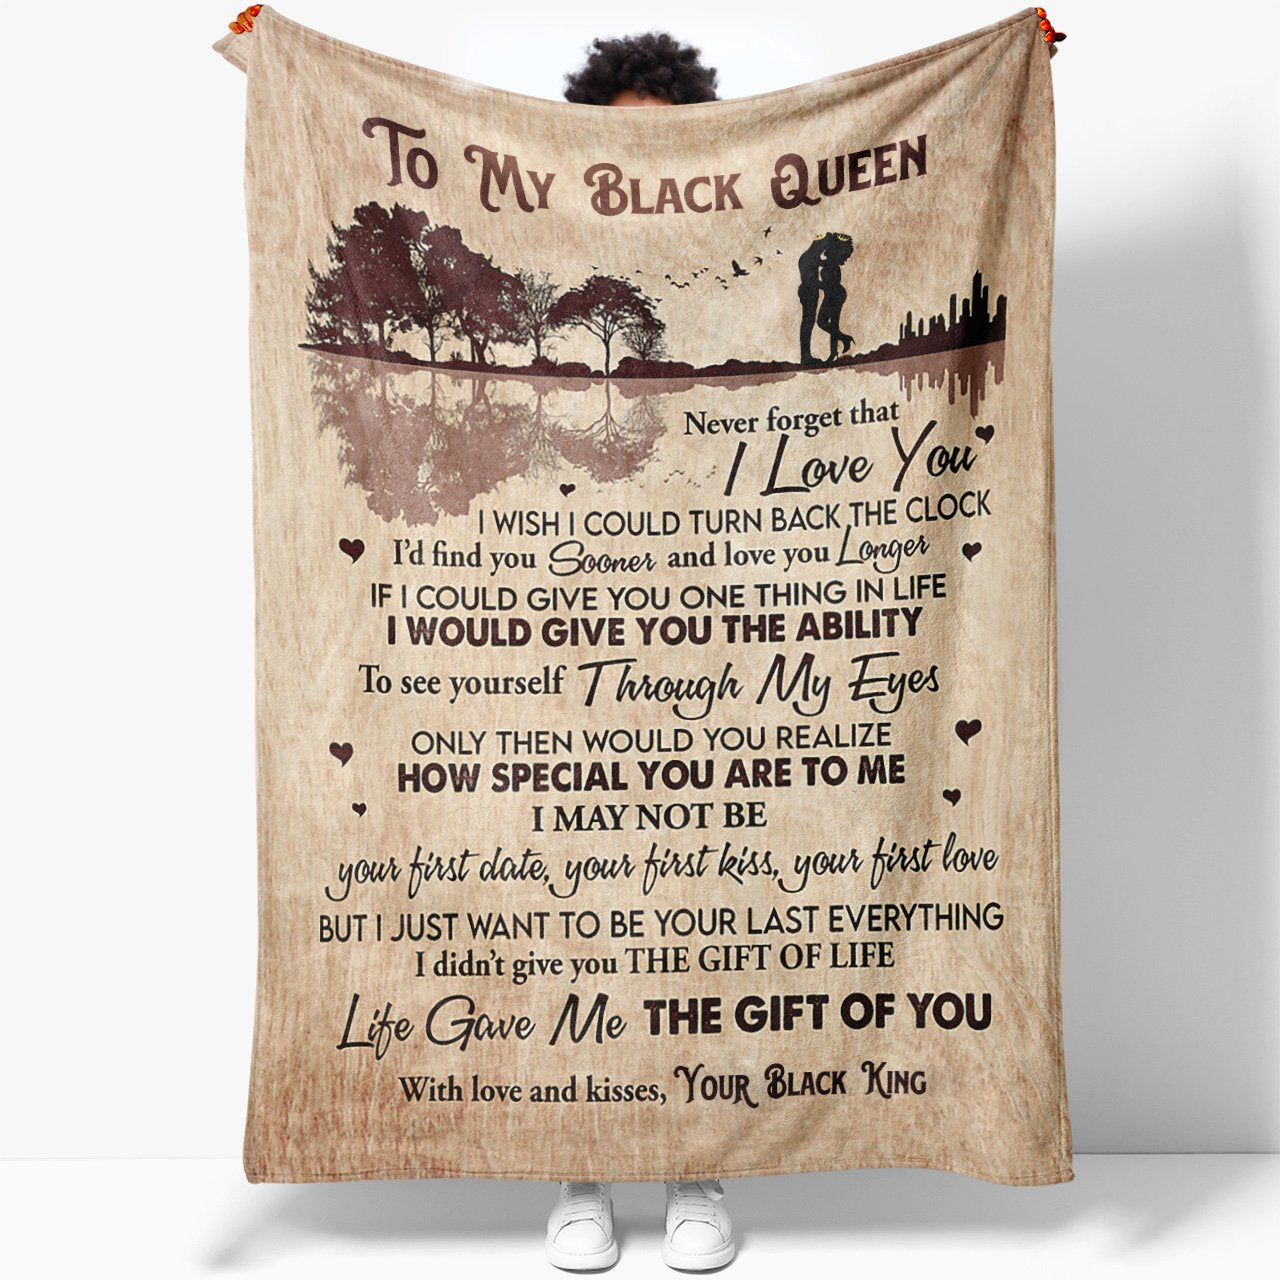 Blanket to My Black Queen Wife, Life Gave Me the Gift of You Blanket for Her, Birthday Gift Ideas For Her, Christmas Gifts For Wife